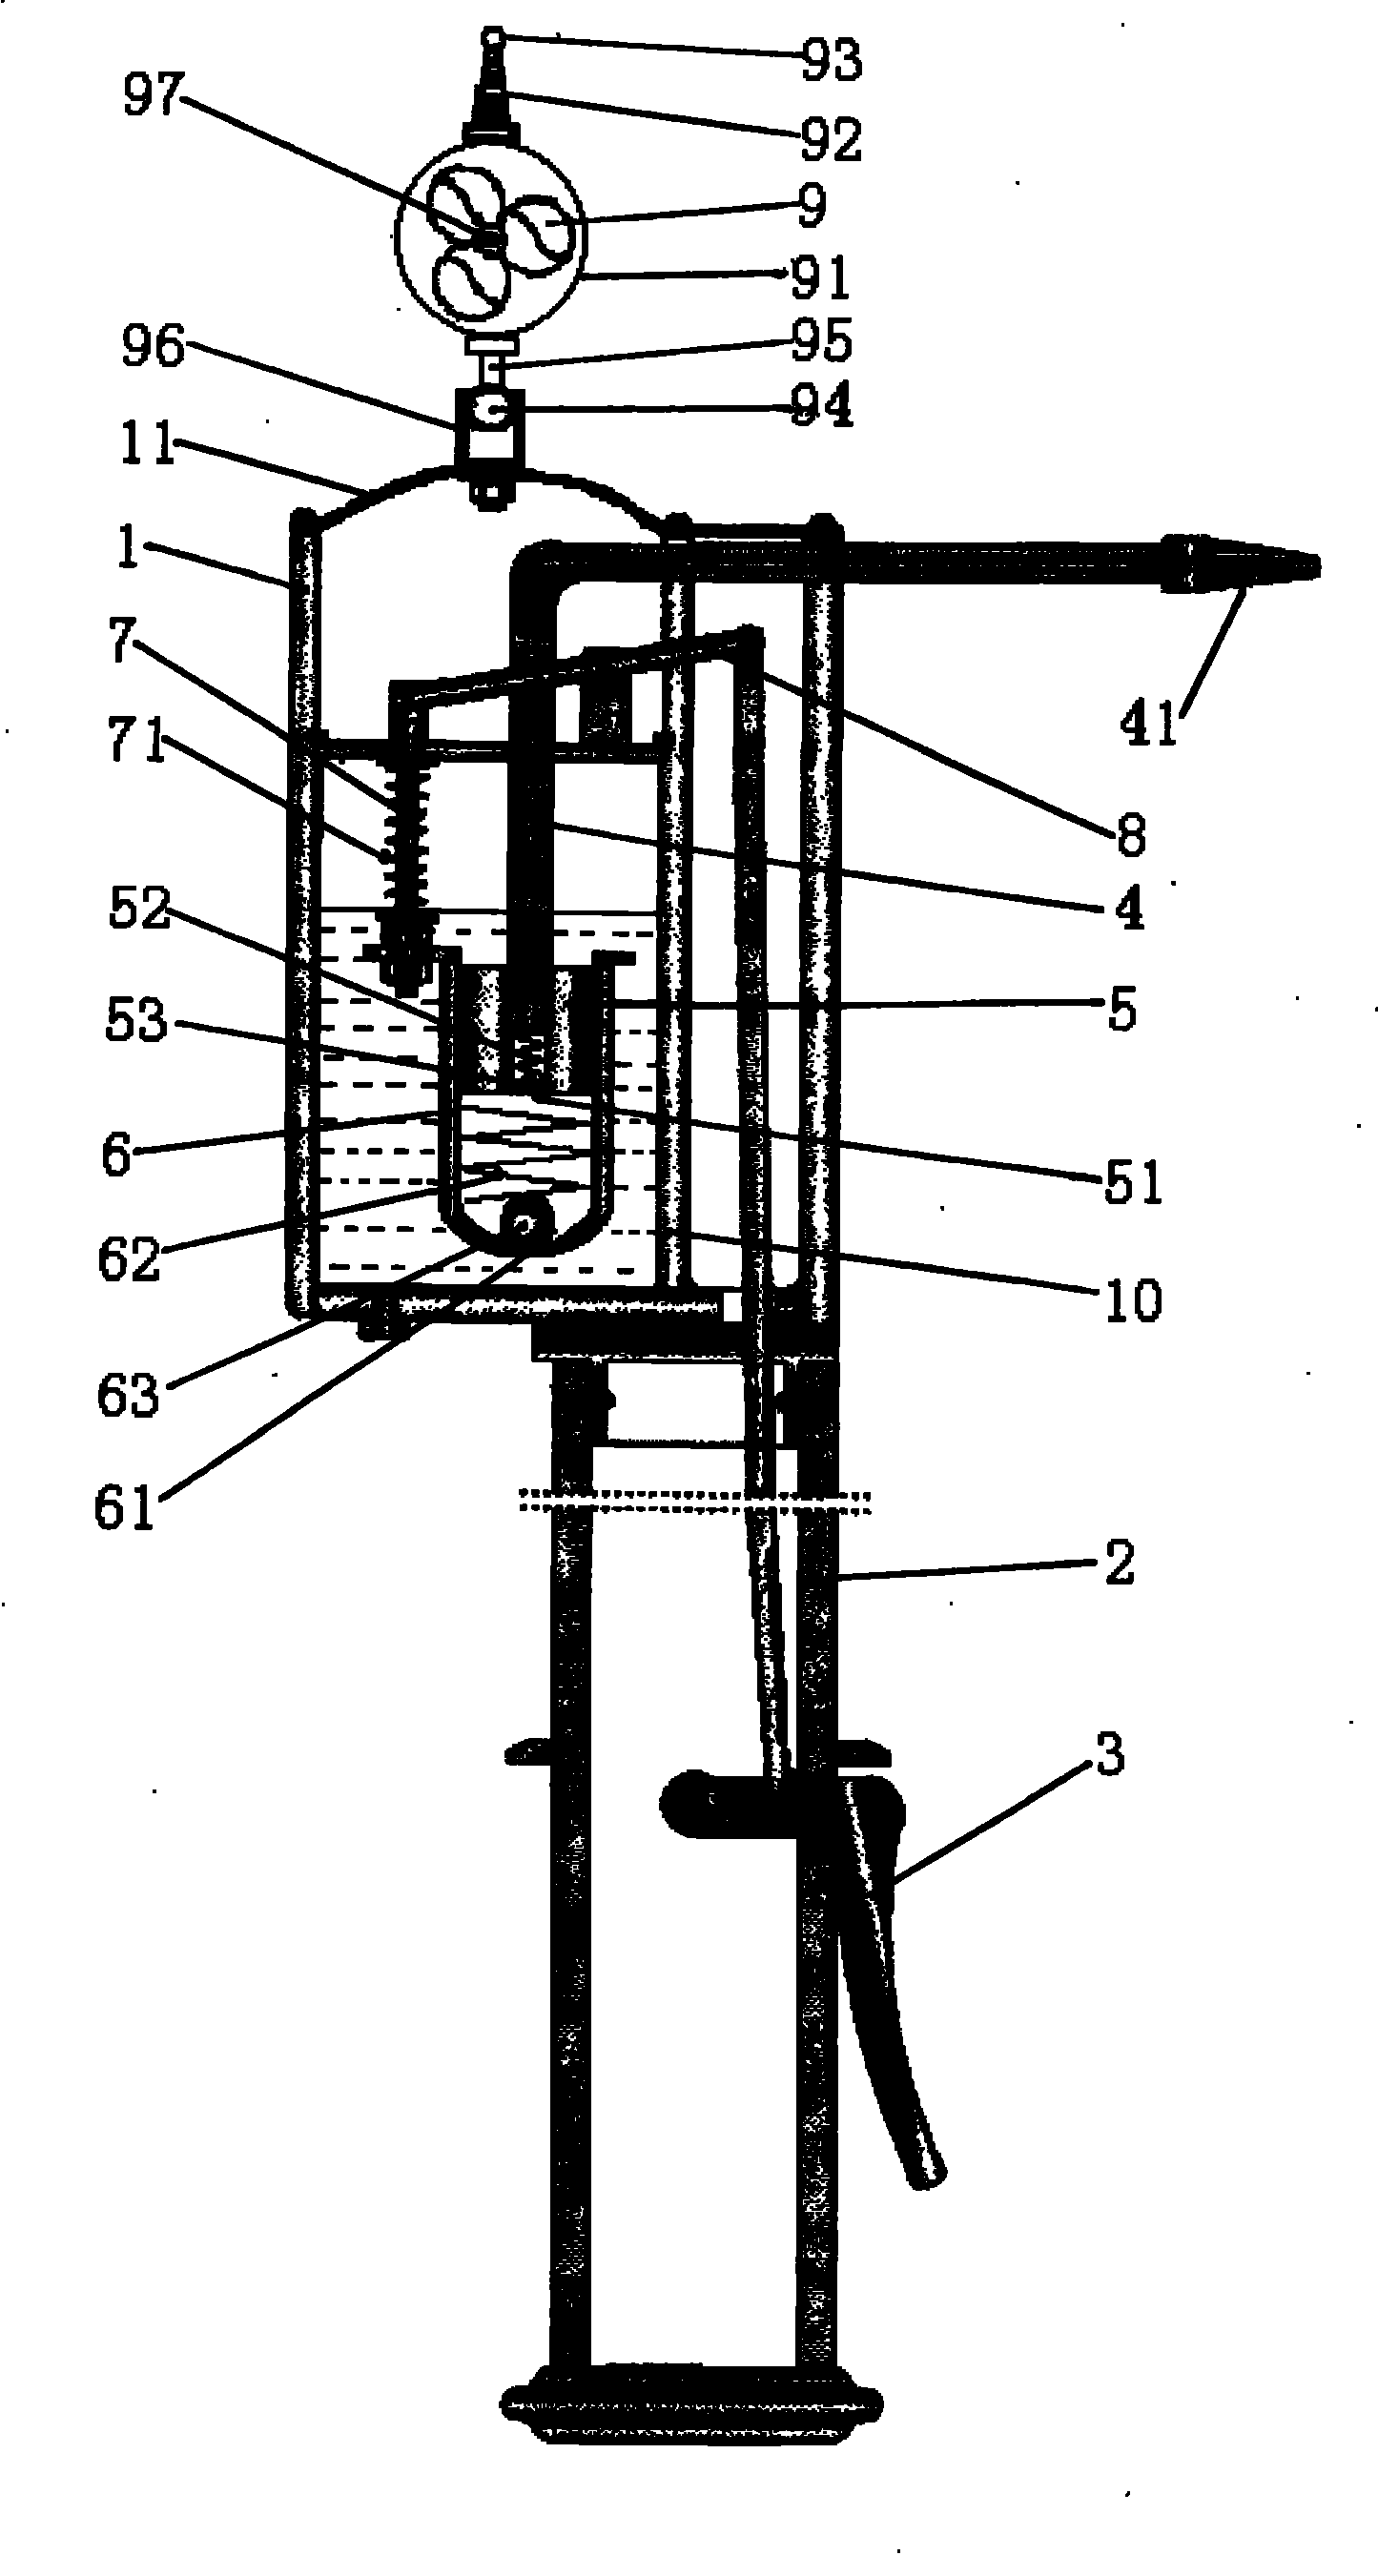 Electrified lubricator of high voltage isolating switch